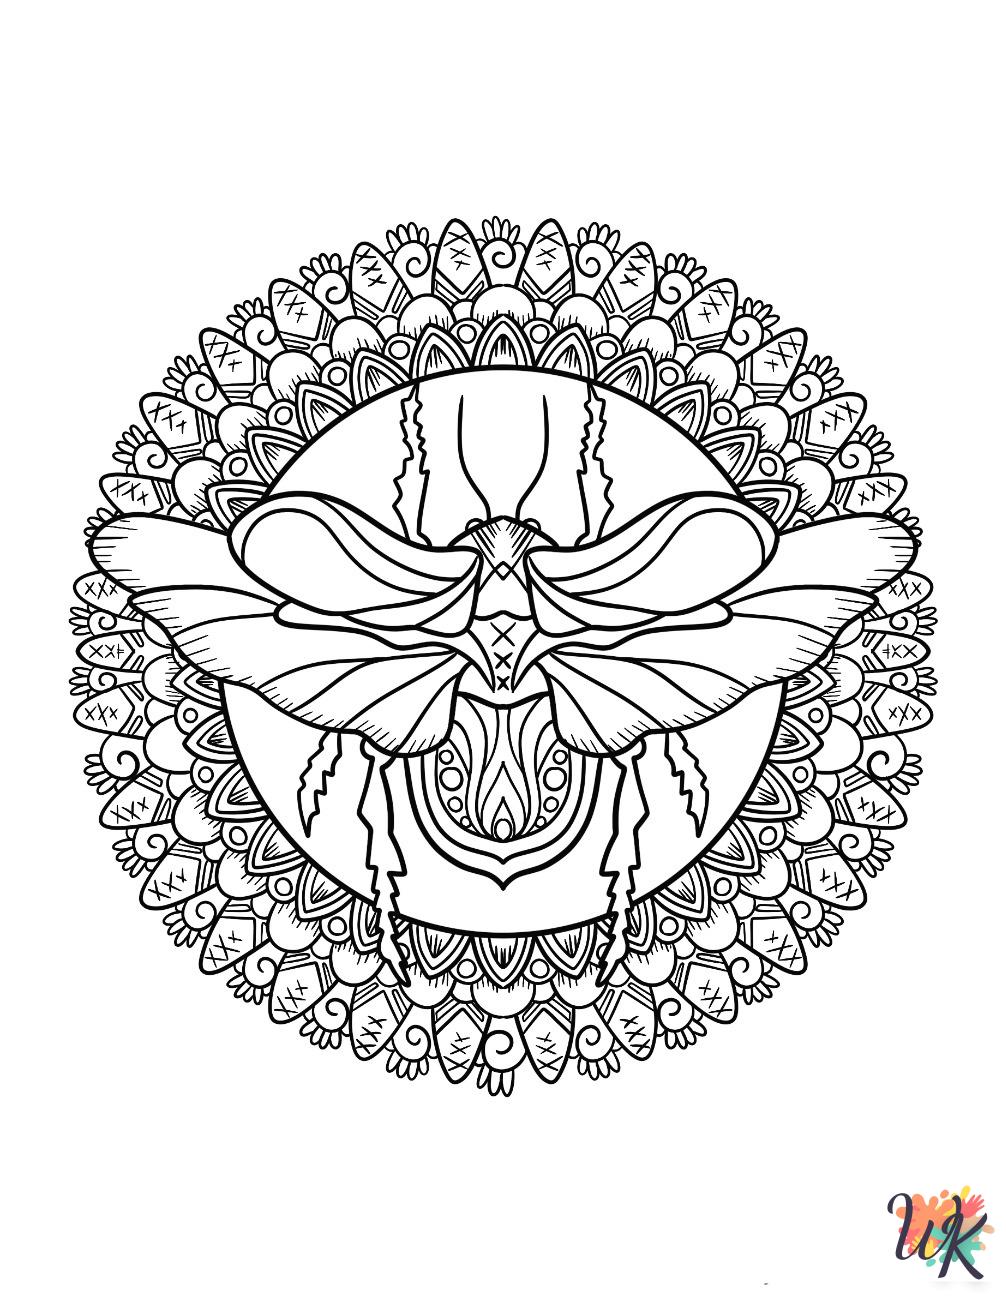 Beetle coloring pages for adults pdf